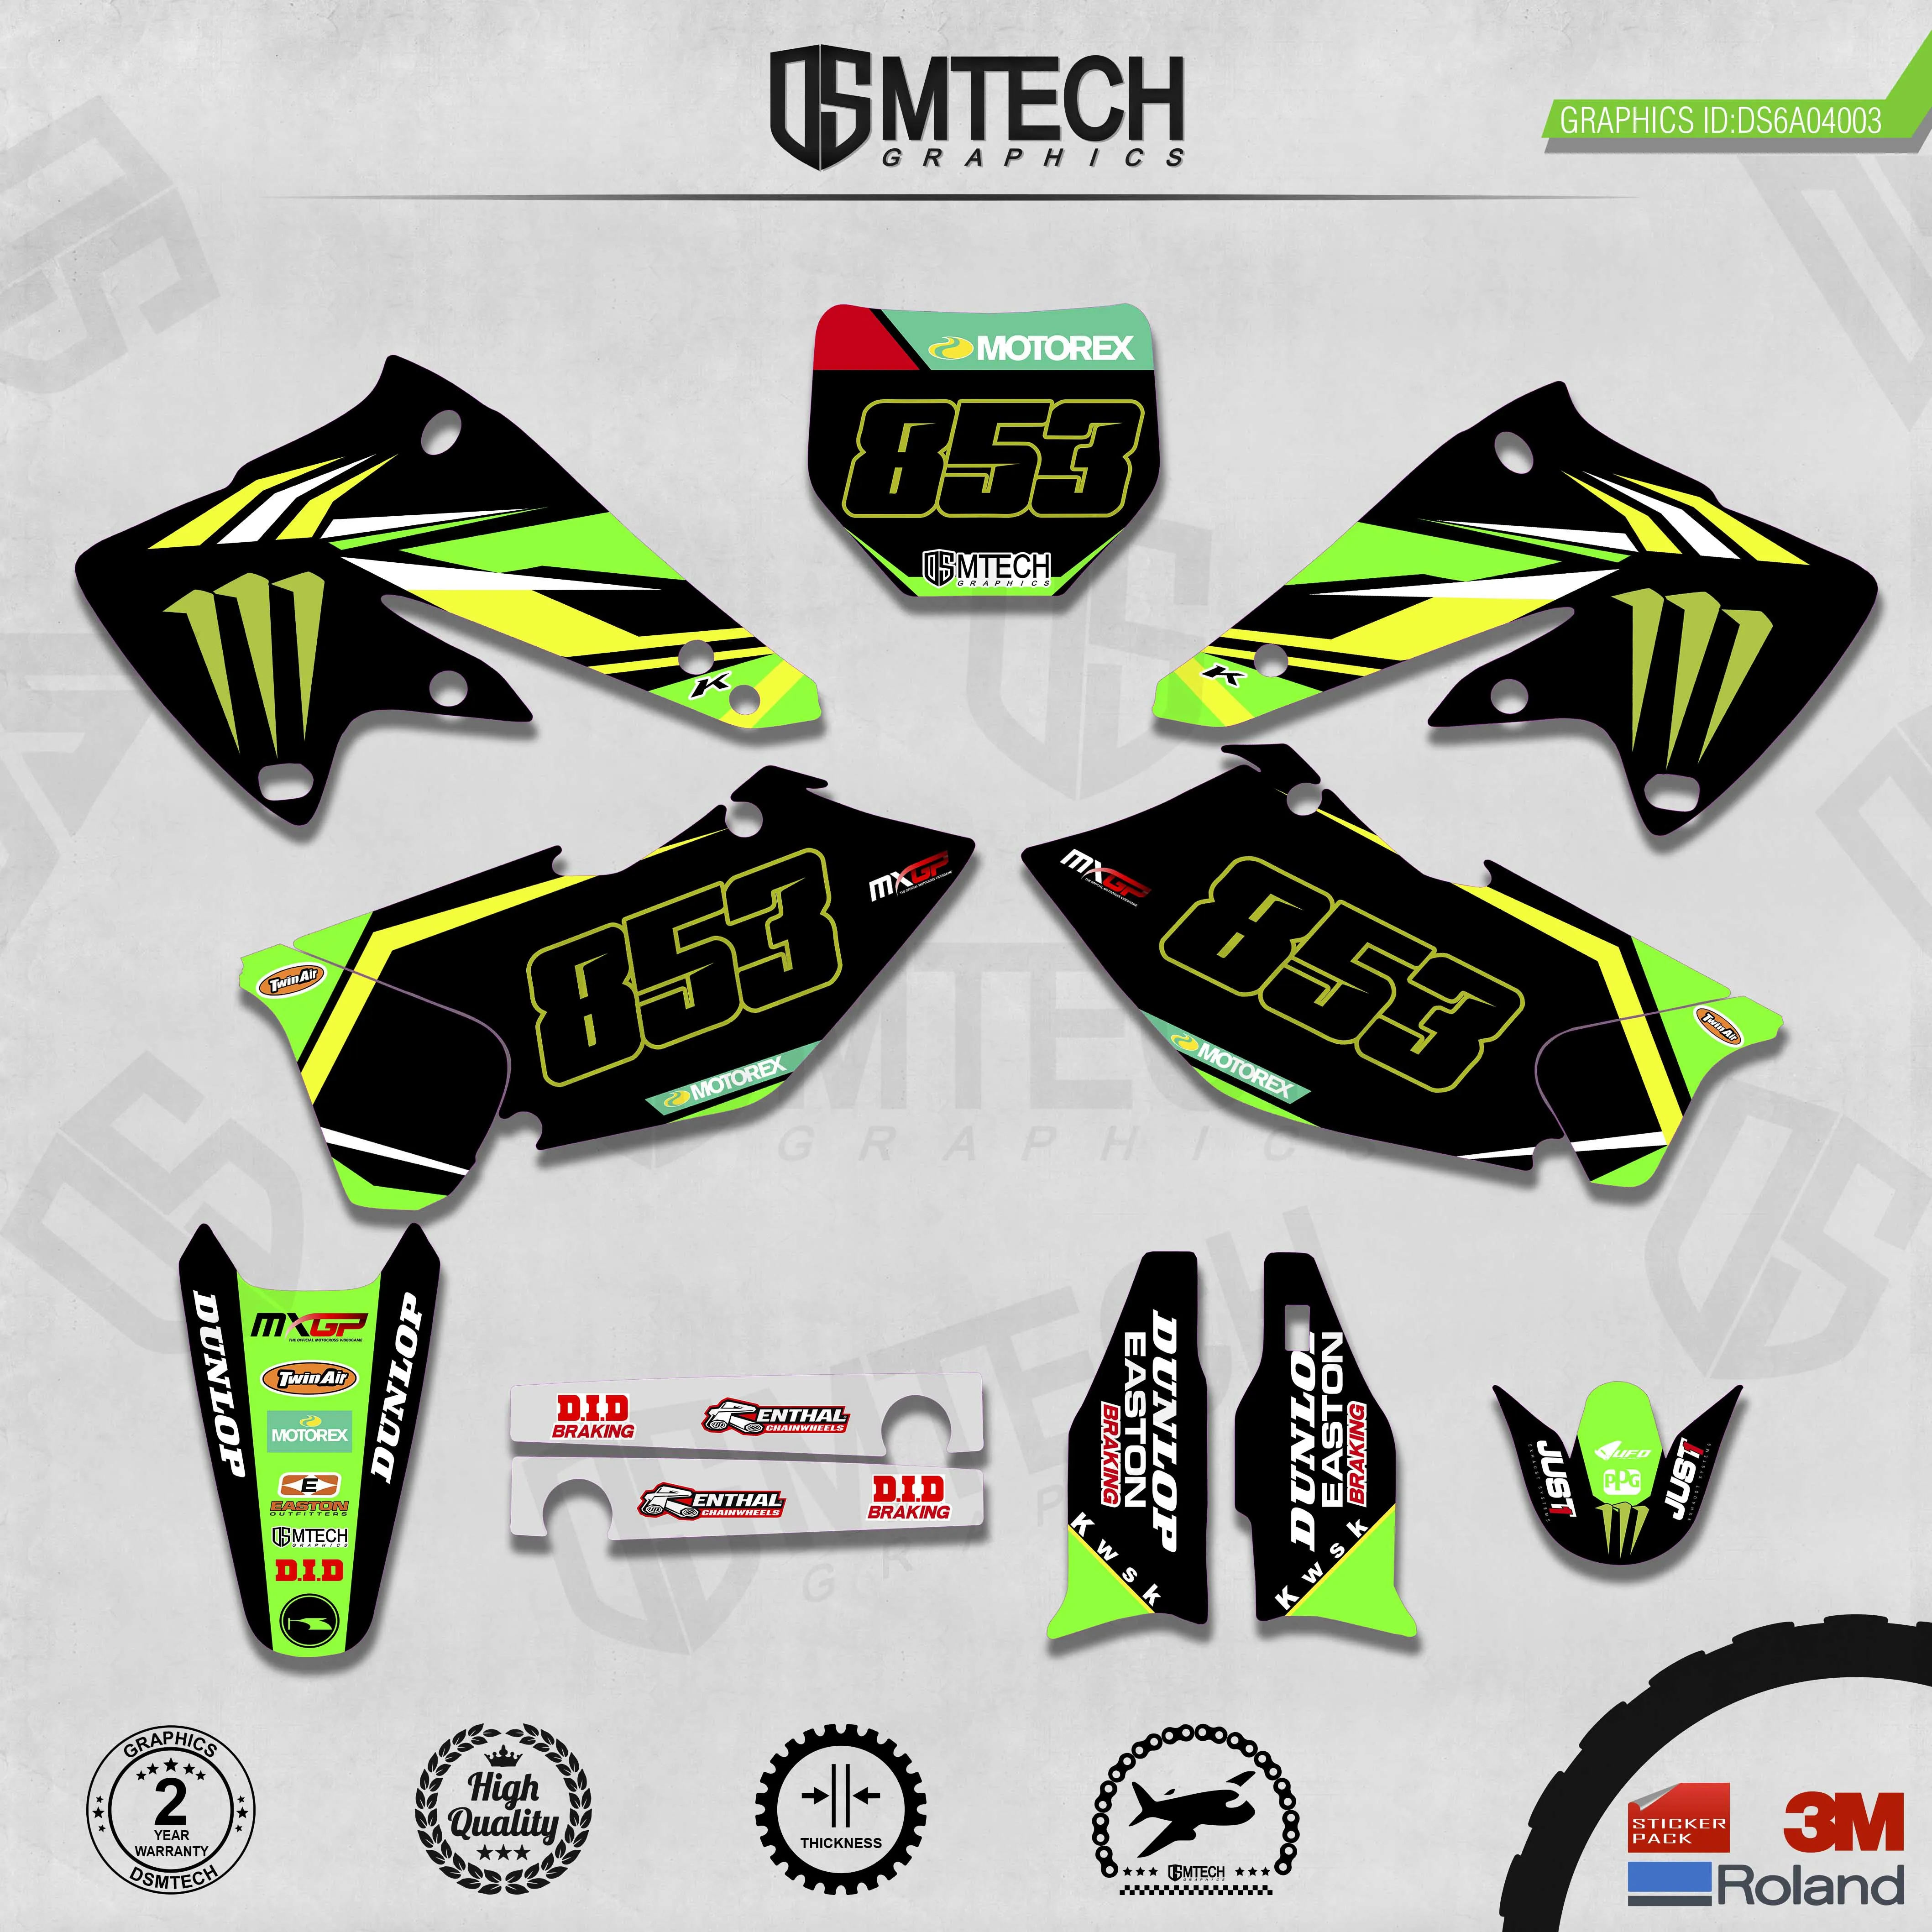 DSMTECH Customized Team Graphics Backgrounds Decals 3M Custom Stickers For KAWASAKI  2004 2005 KXF250  003